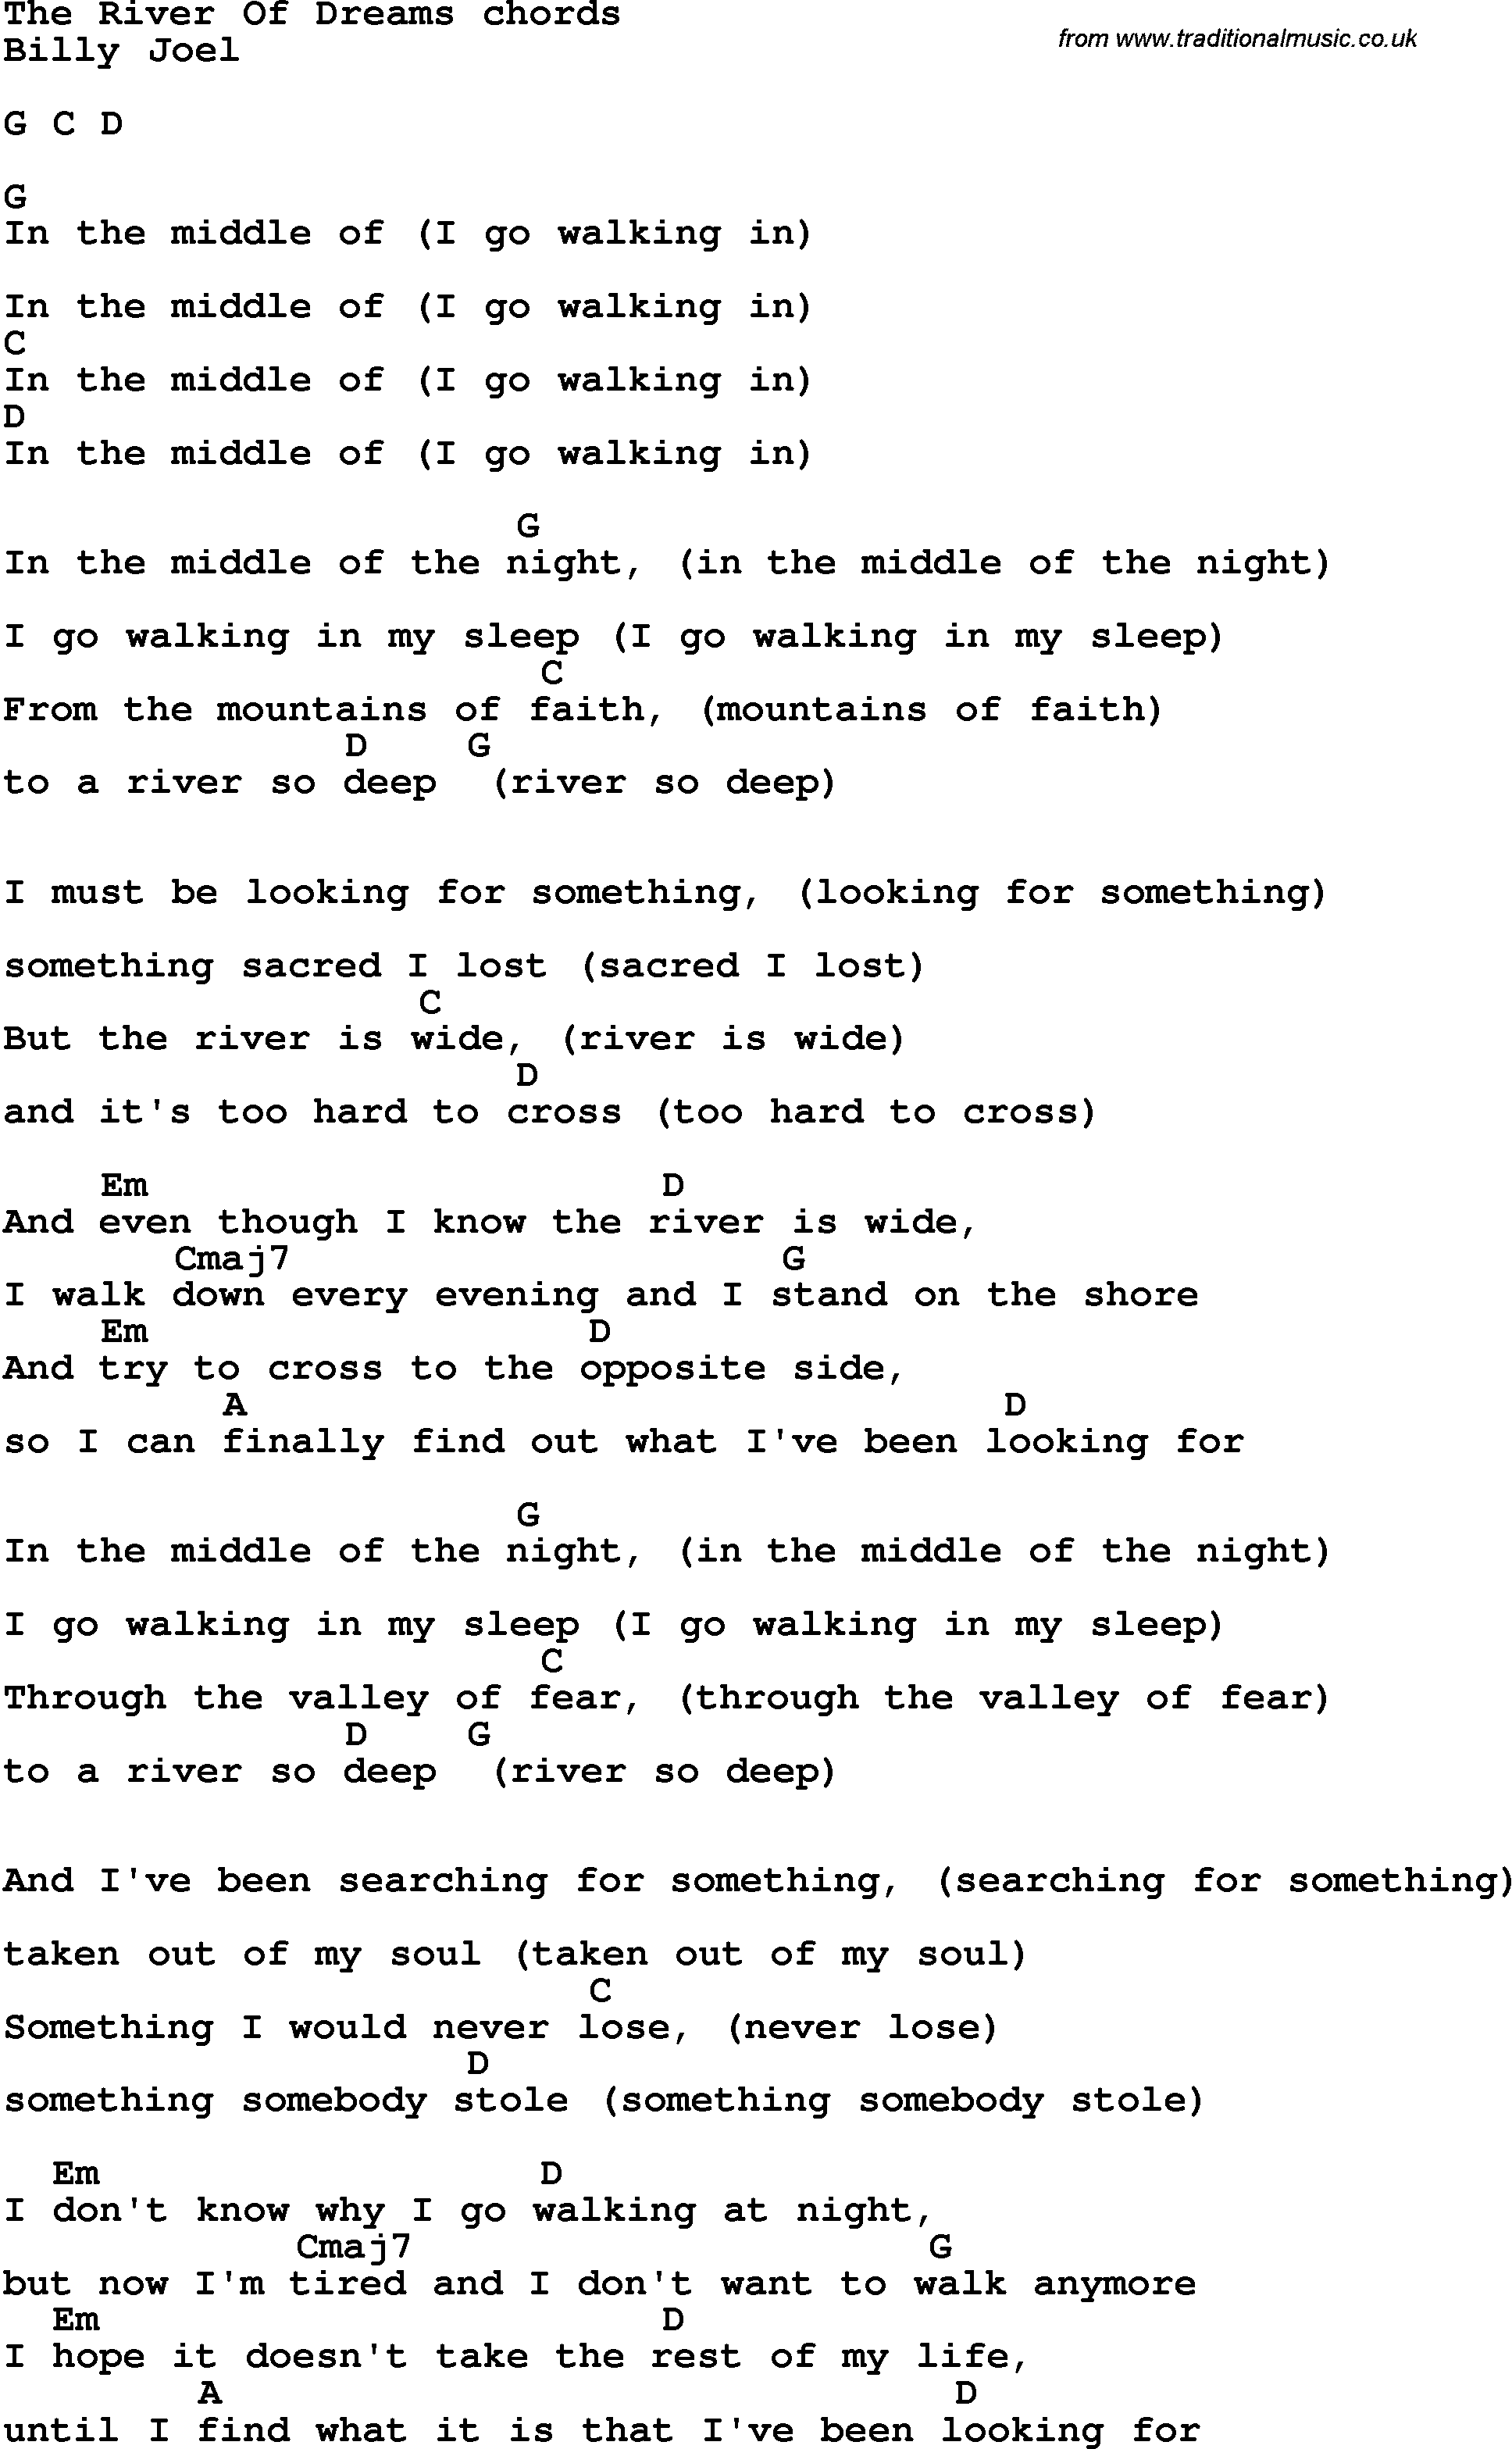 Song Lyrics with guitar chords for The River Of Dreams